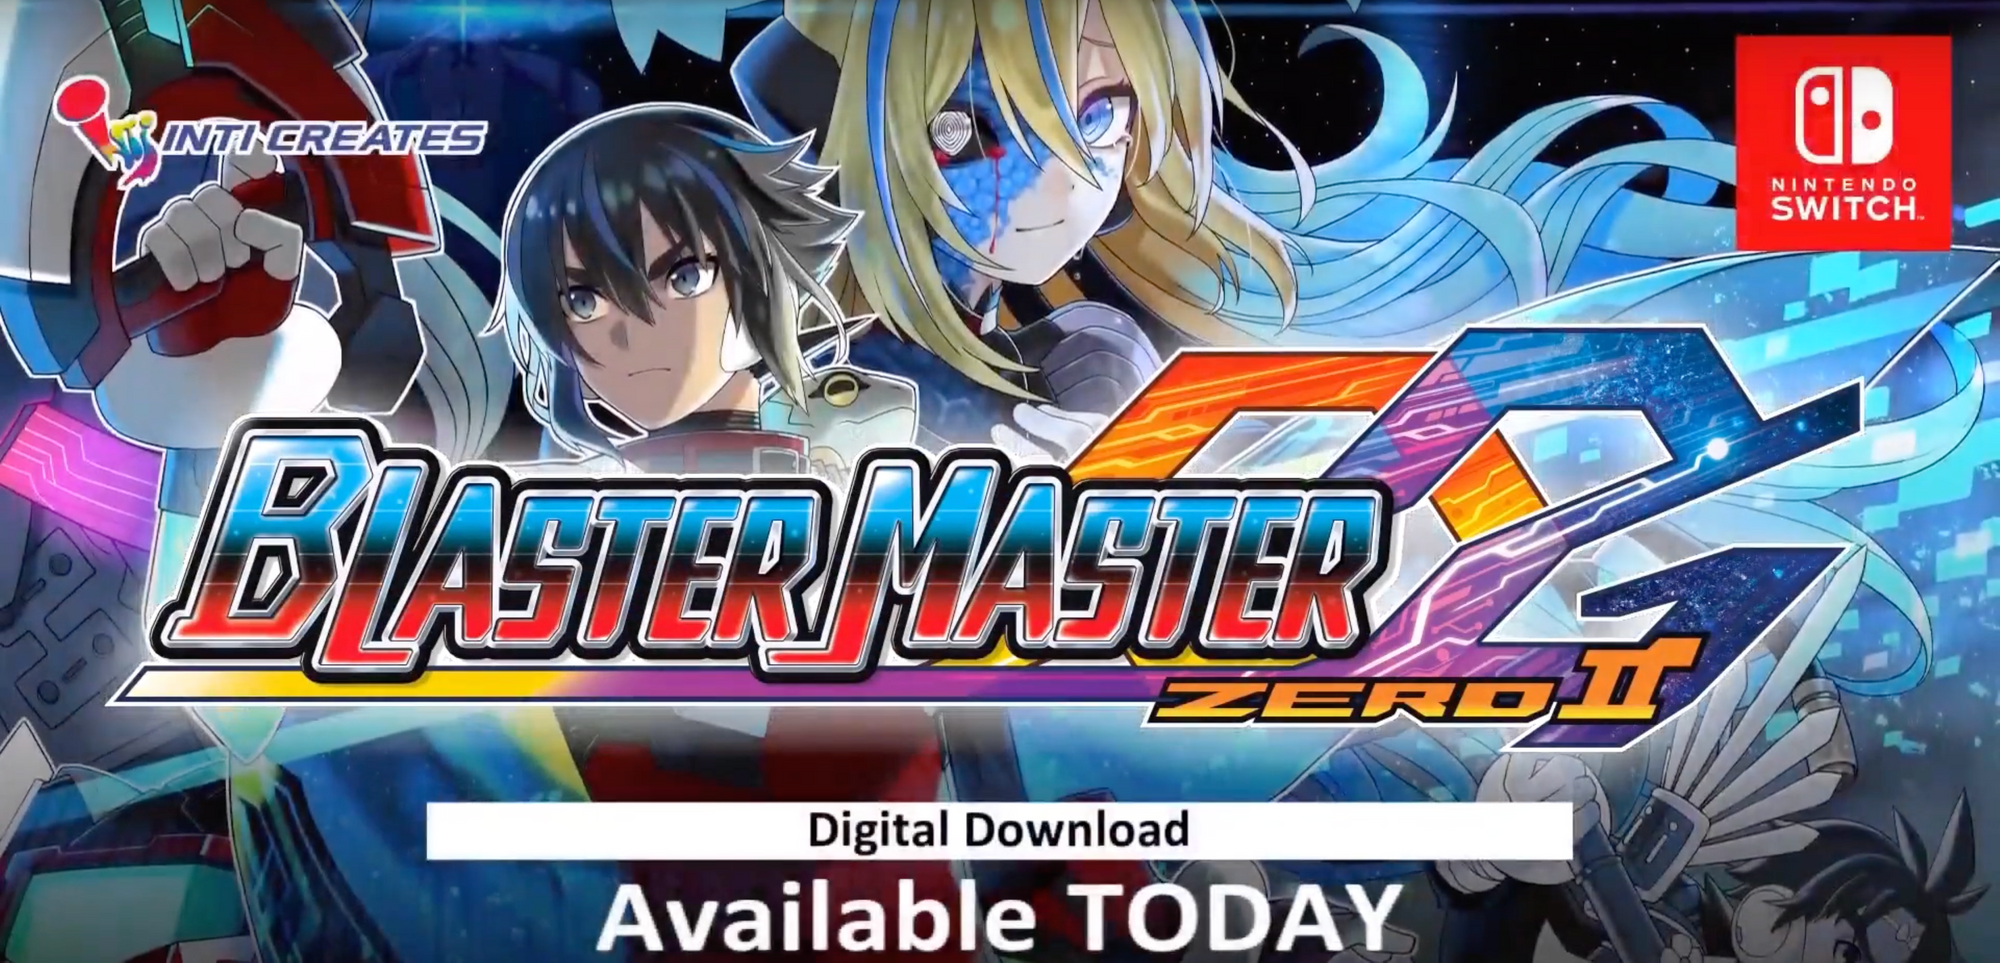 Blaster Master Zero 2 Comes Out Today